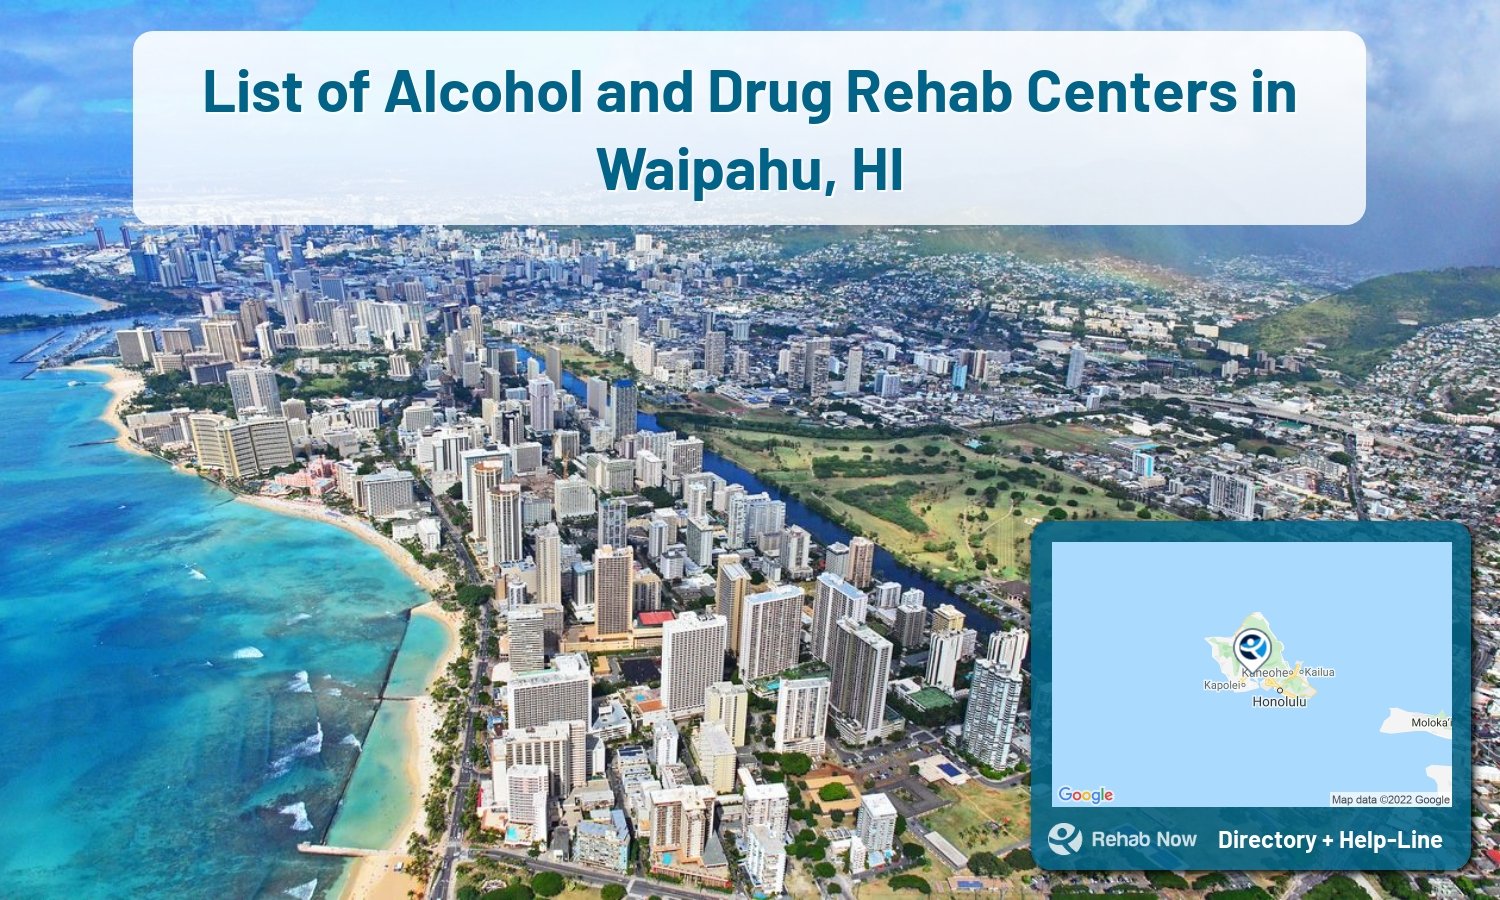 View options, availability, treatment methods, and more, for drug rehab and alcohol treatment in Waipahu, Hawaii